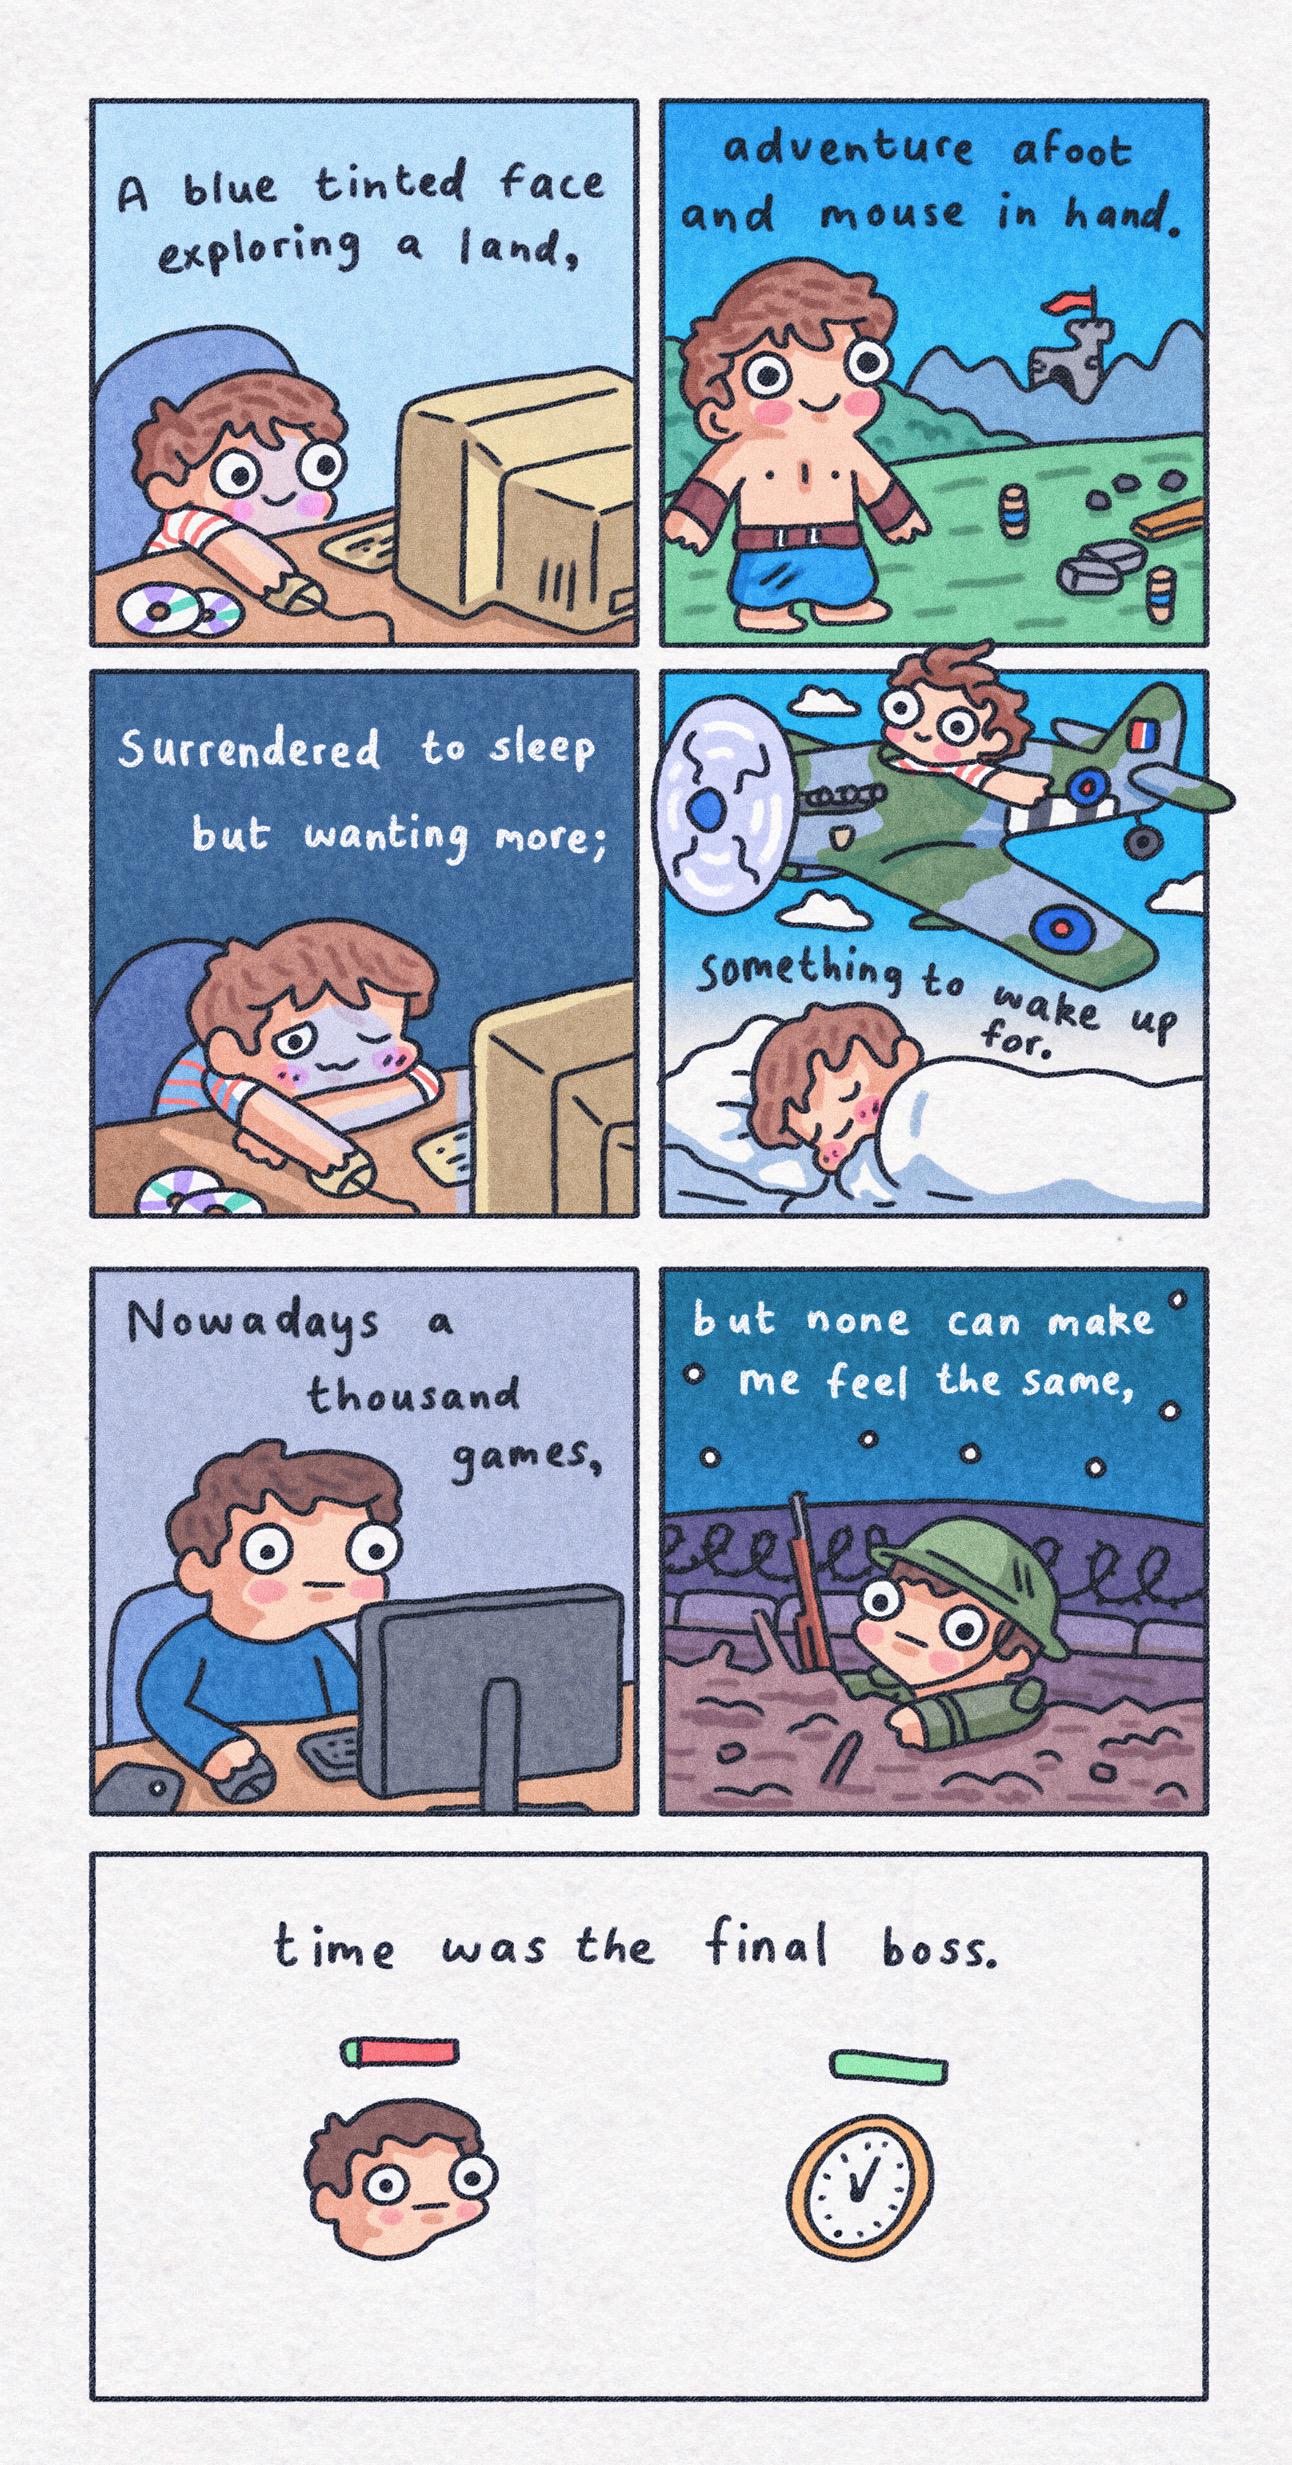 gaming nostalgia comic - A blue tinted face exploring a land, adventure afect and Mouse in hand 09 os Surrendered to sleep but wanting more; Something Nowadays but none can make me feel the same, he games, time was the final boss. WO_9